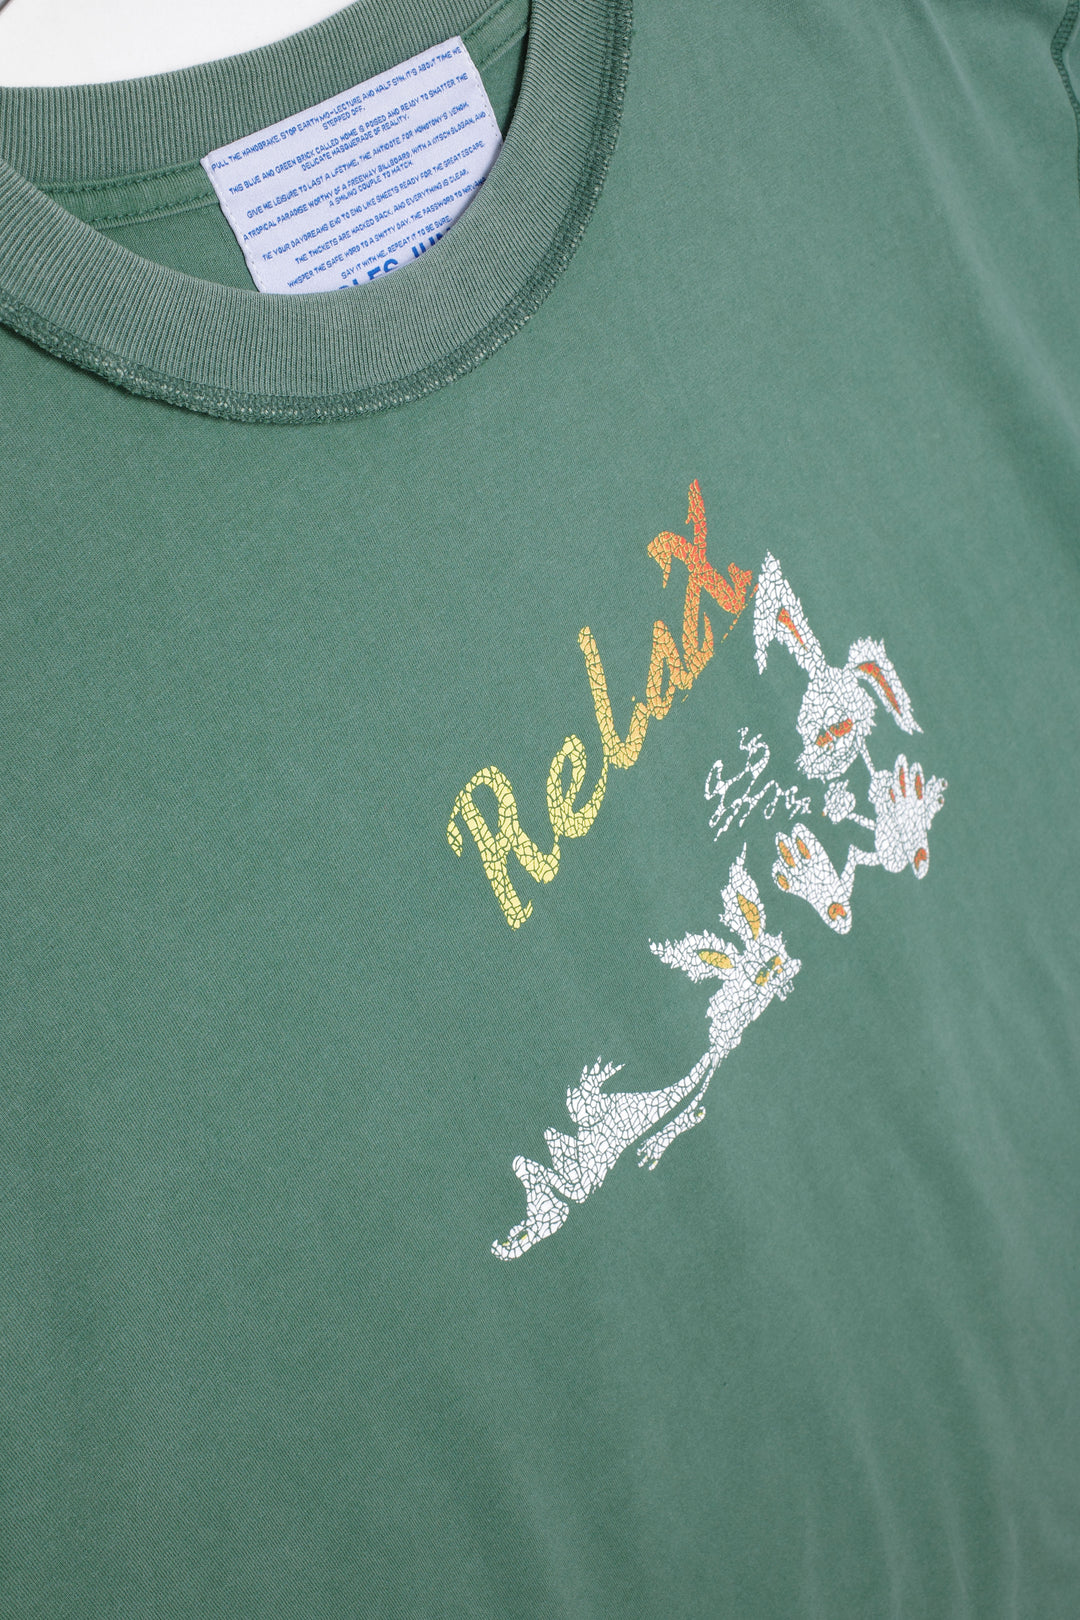 Relax Vintage Tee (Washed Green)